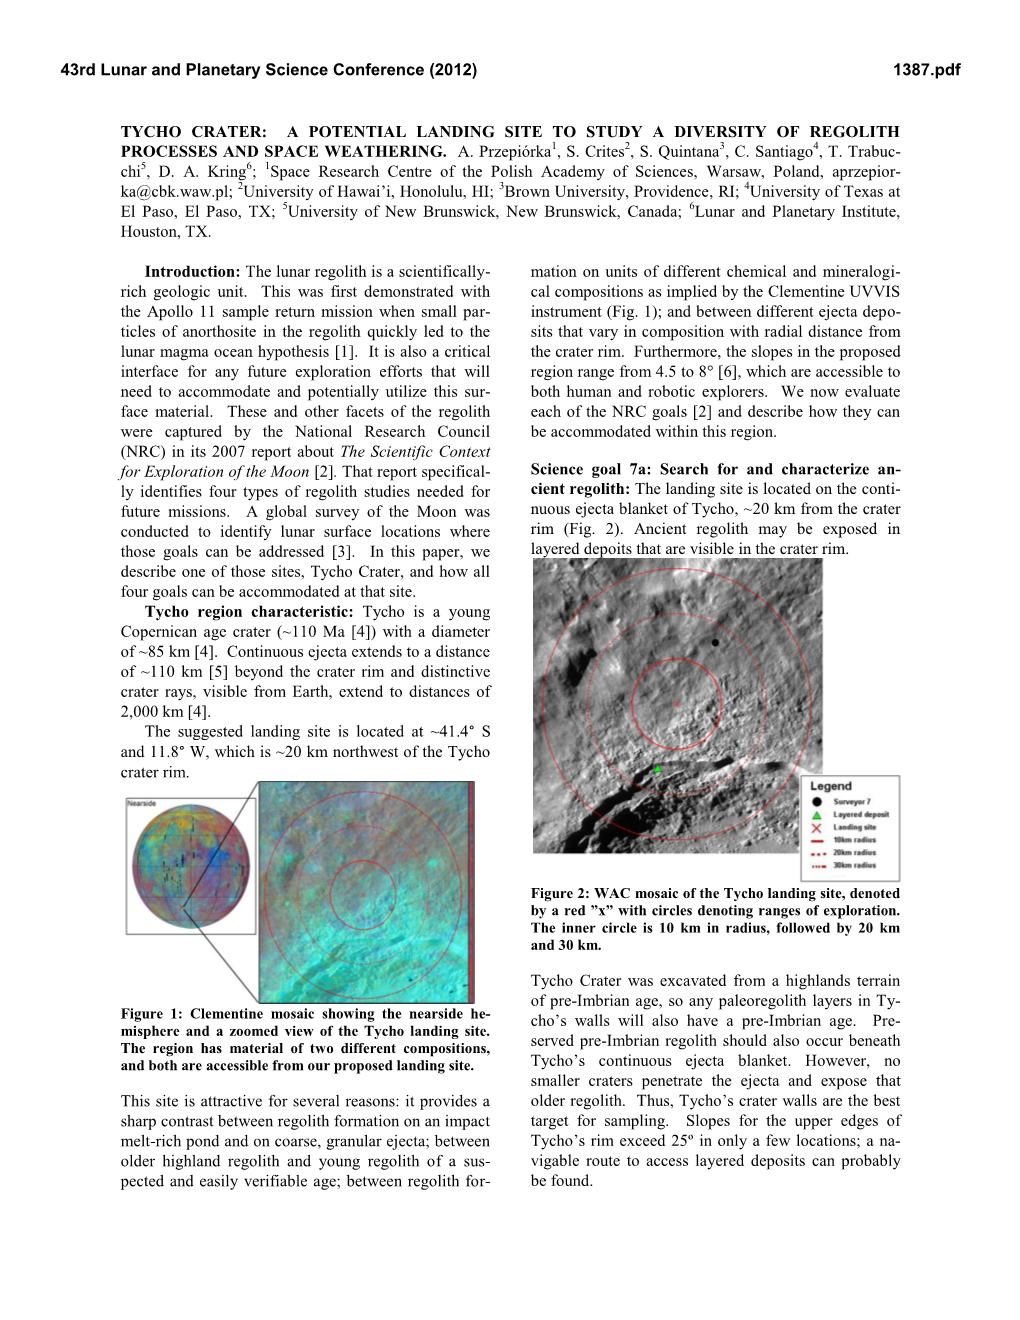 Tycho Crater: a Potential Landing Site to Study a Diversity of Regolith Processes and Space Weathering